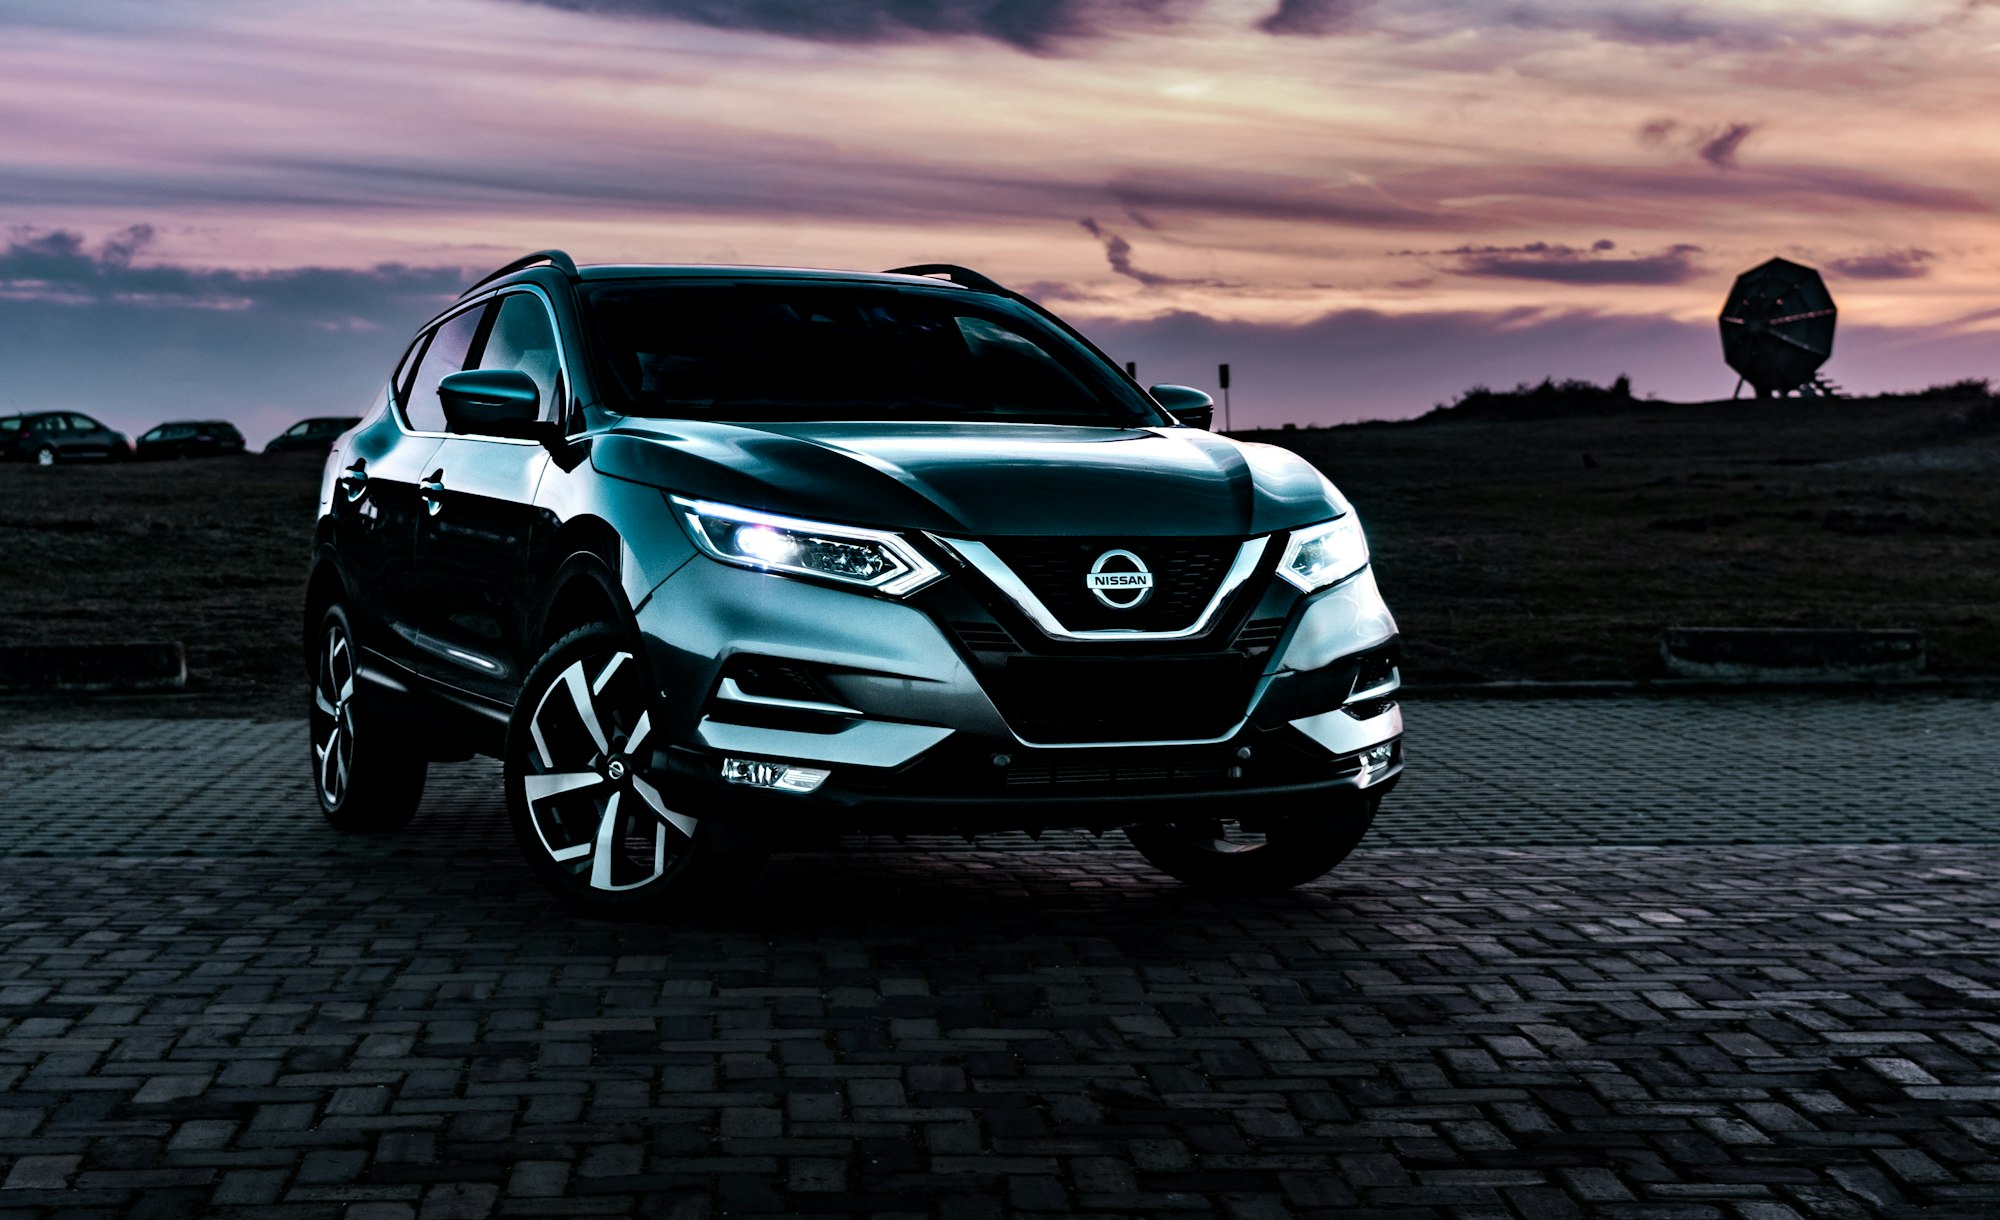 Nissan Tops Ranking of Most-Seen Auto TV Ads